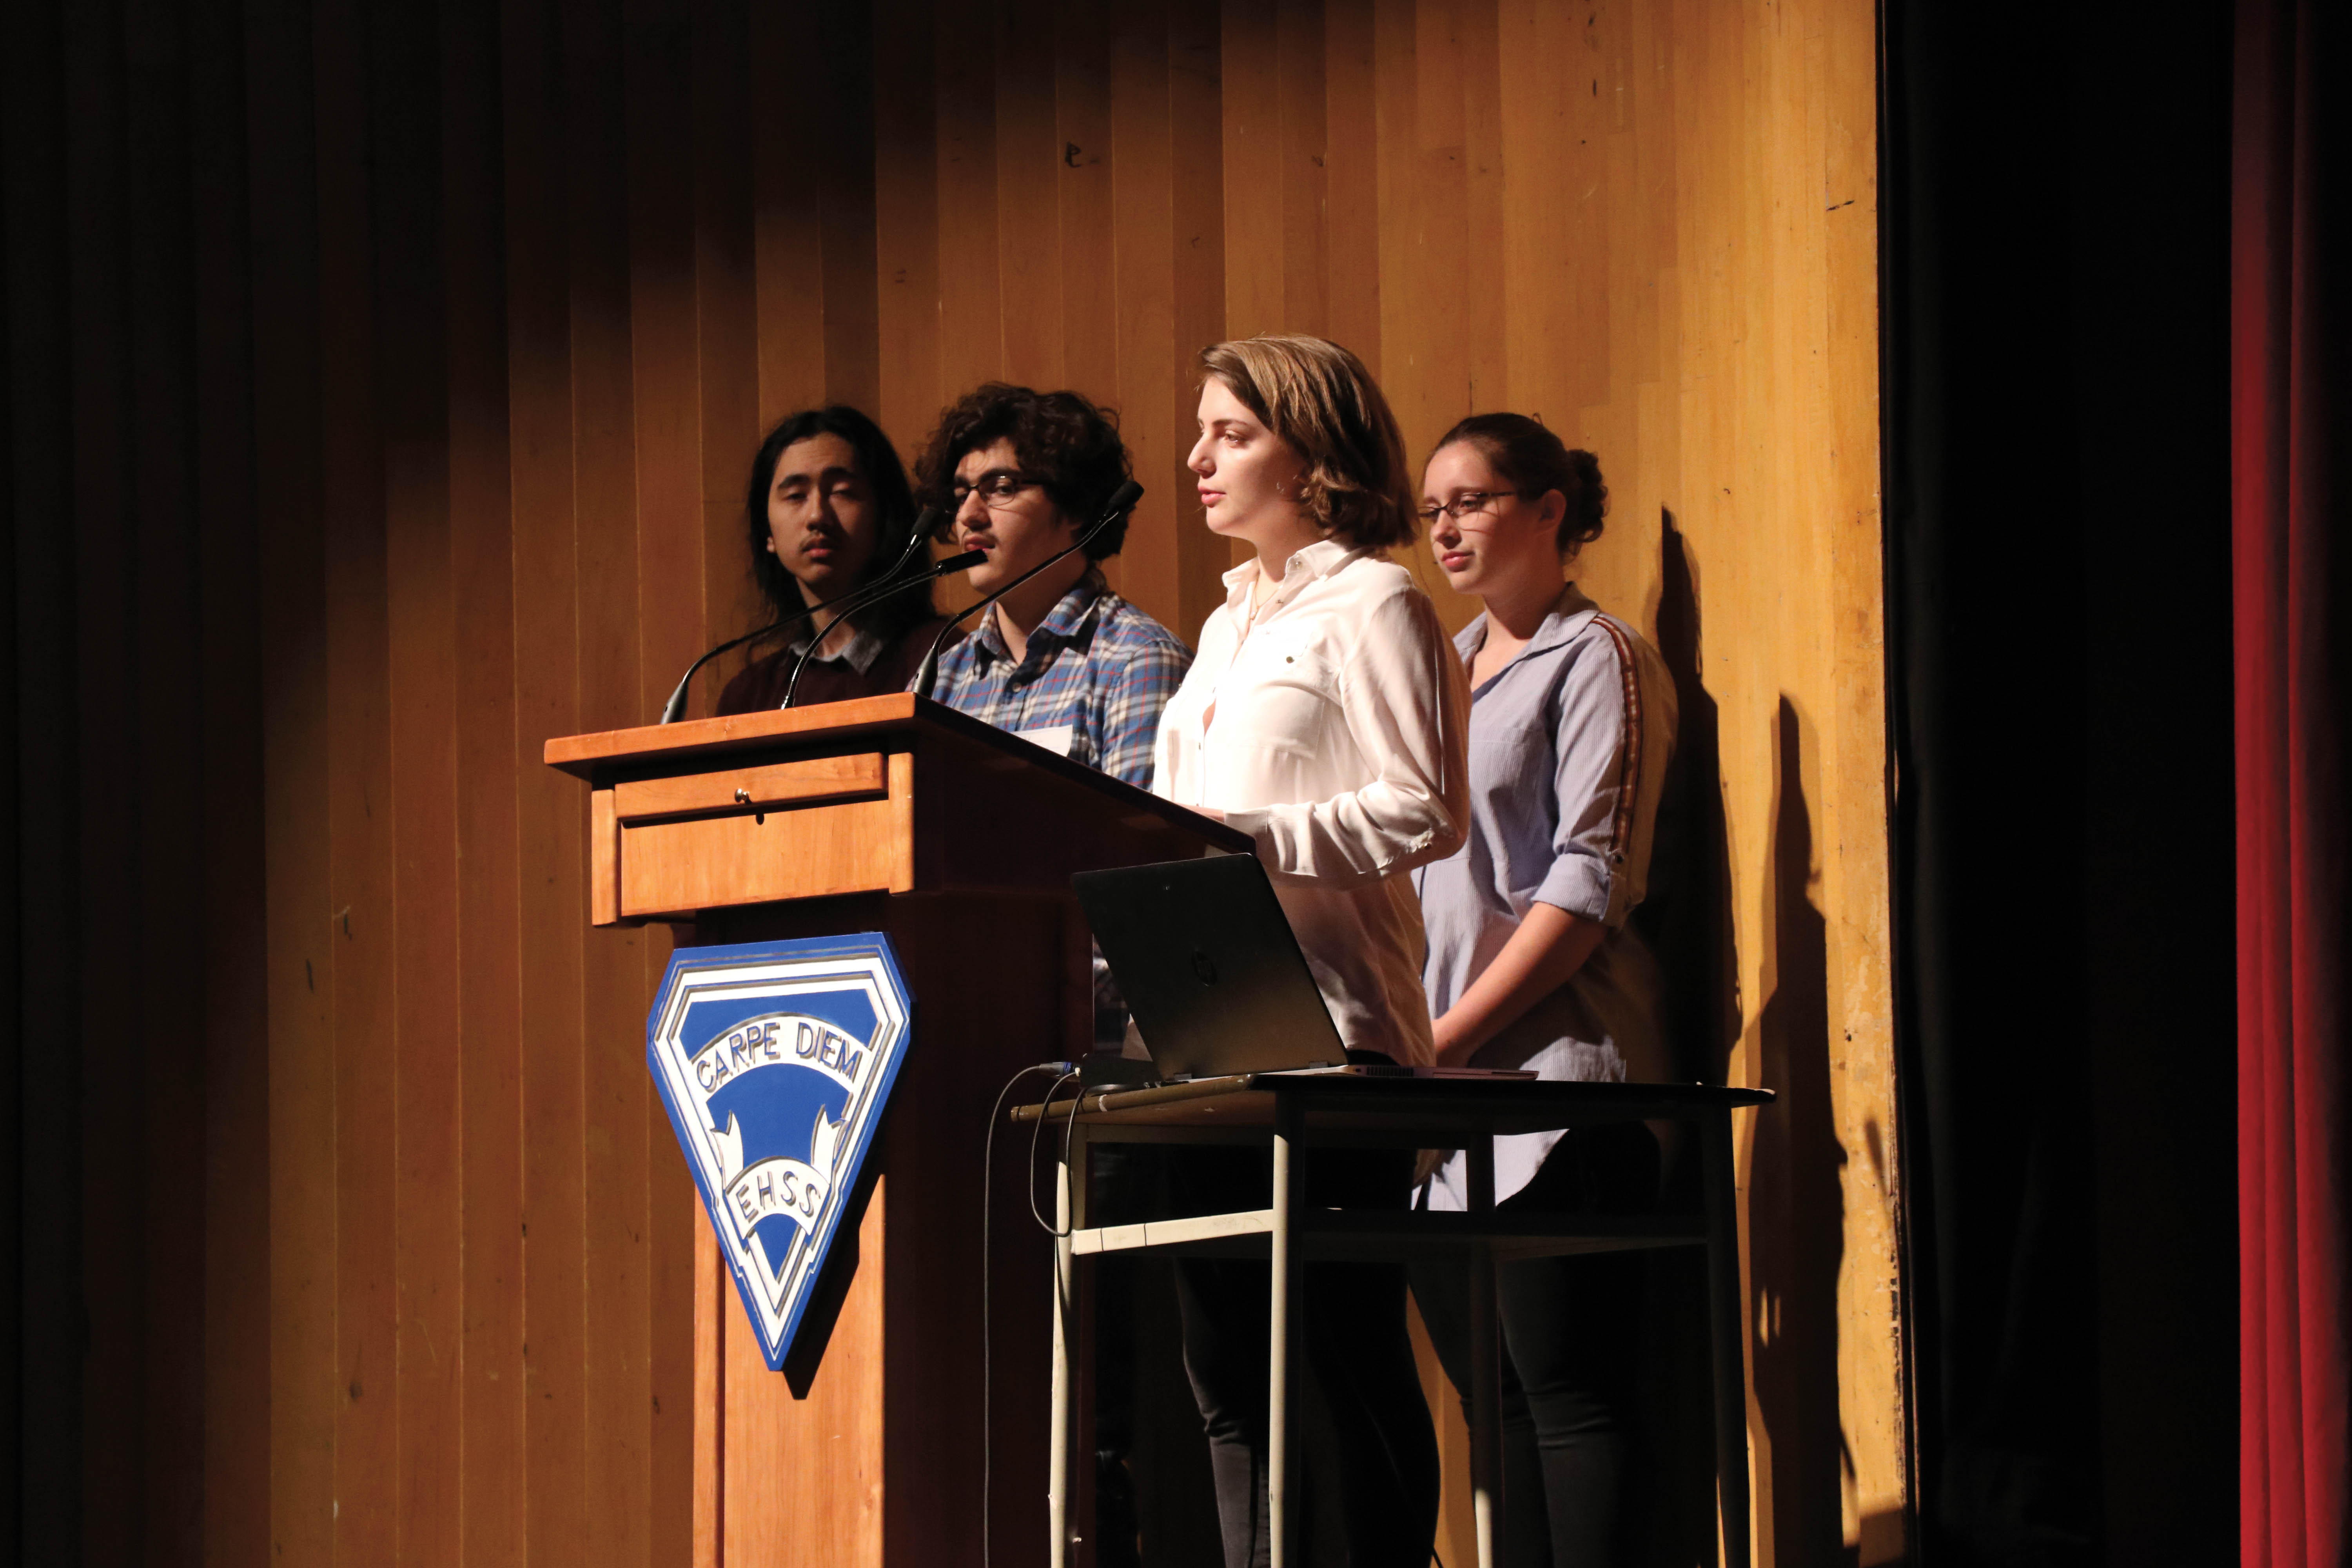 A photo of four students at a podium in an auditorium